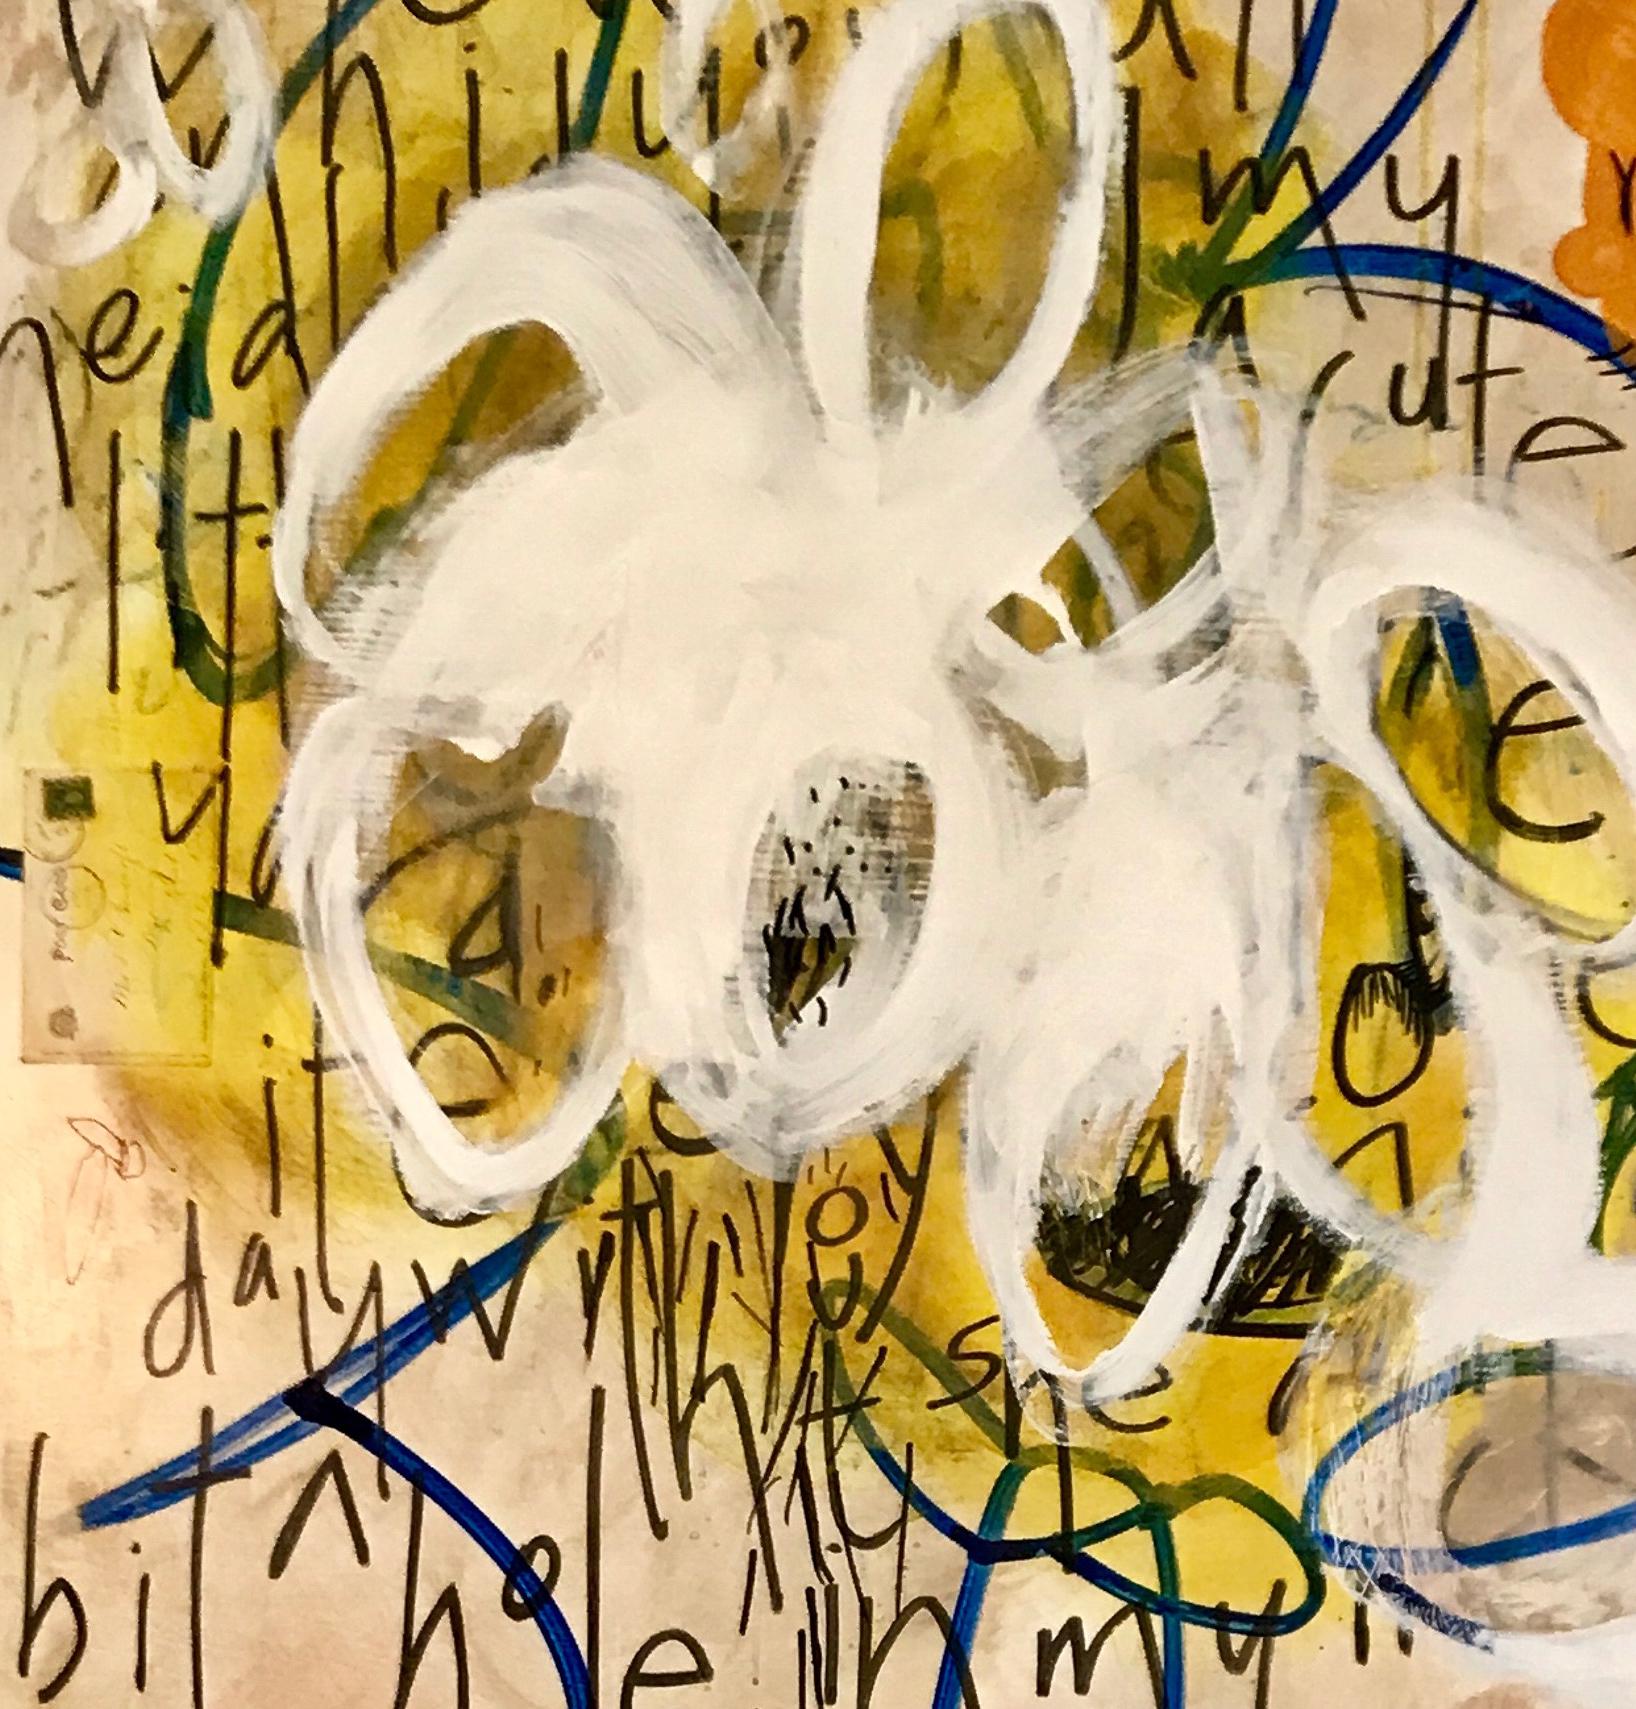 Large abstract mixed media/painting with text on top of birch panel.

I wanted to do a light, friendly piece….with yellow flowers, bunnies, Easter eggs, etc.
This piece is about how sometimes things that look pure and innocent are not what